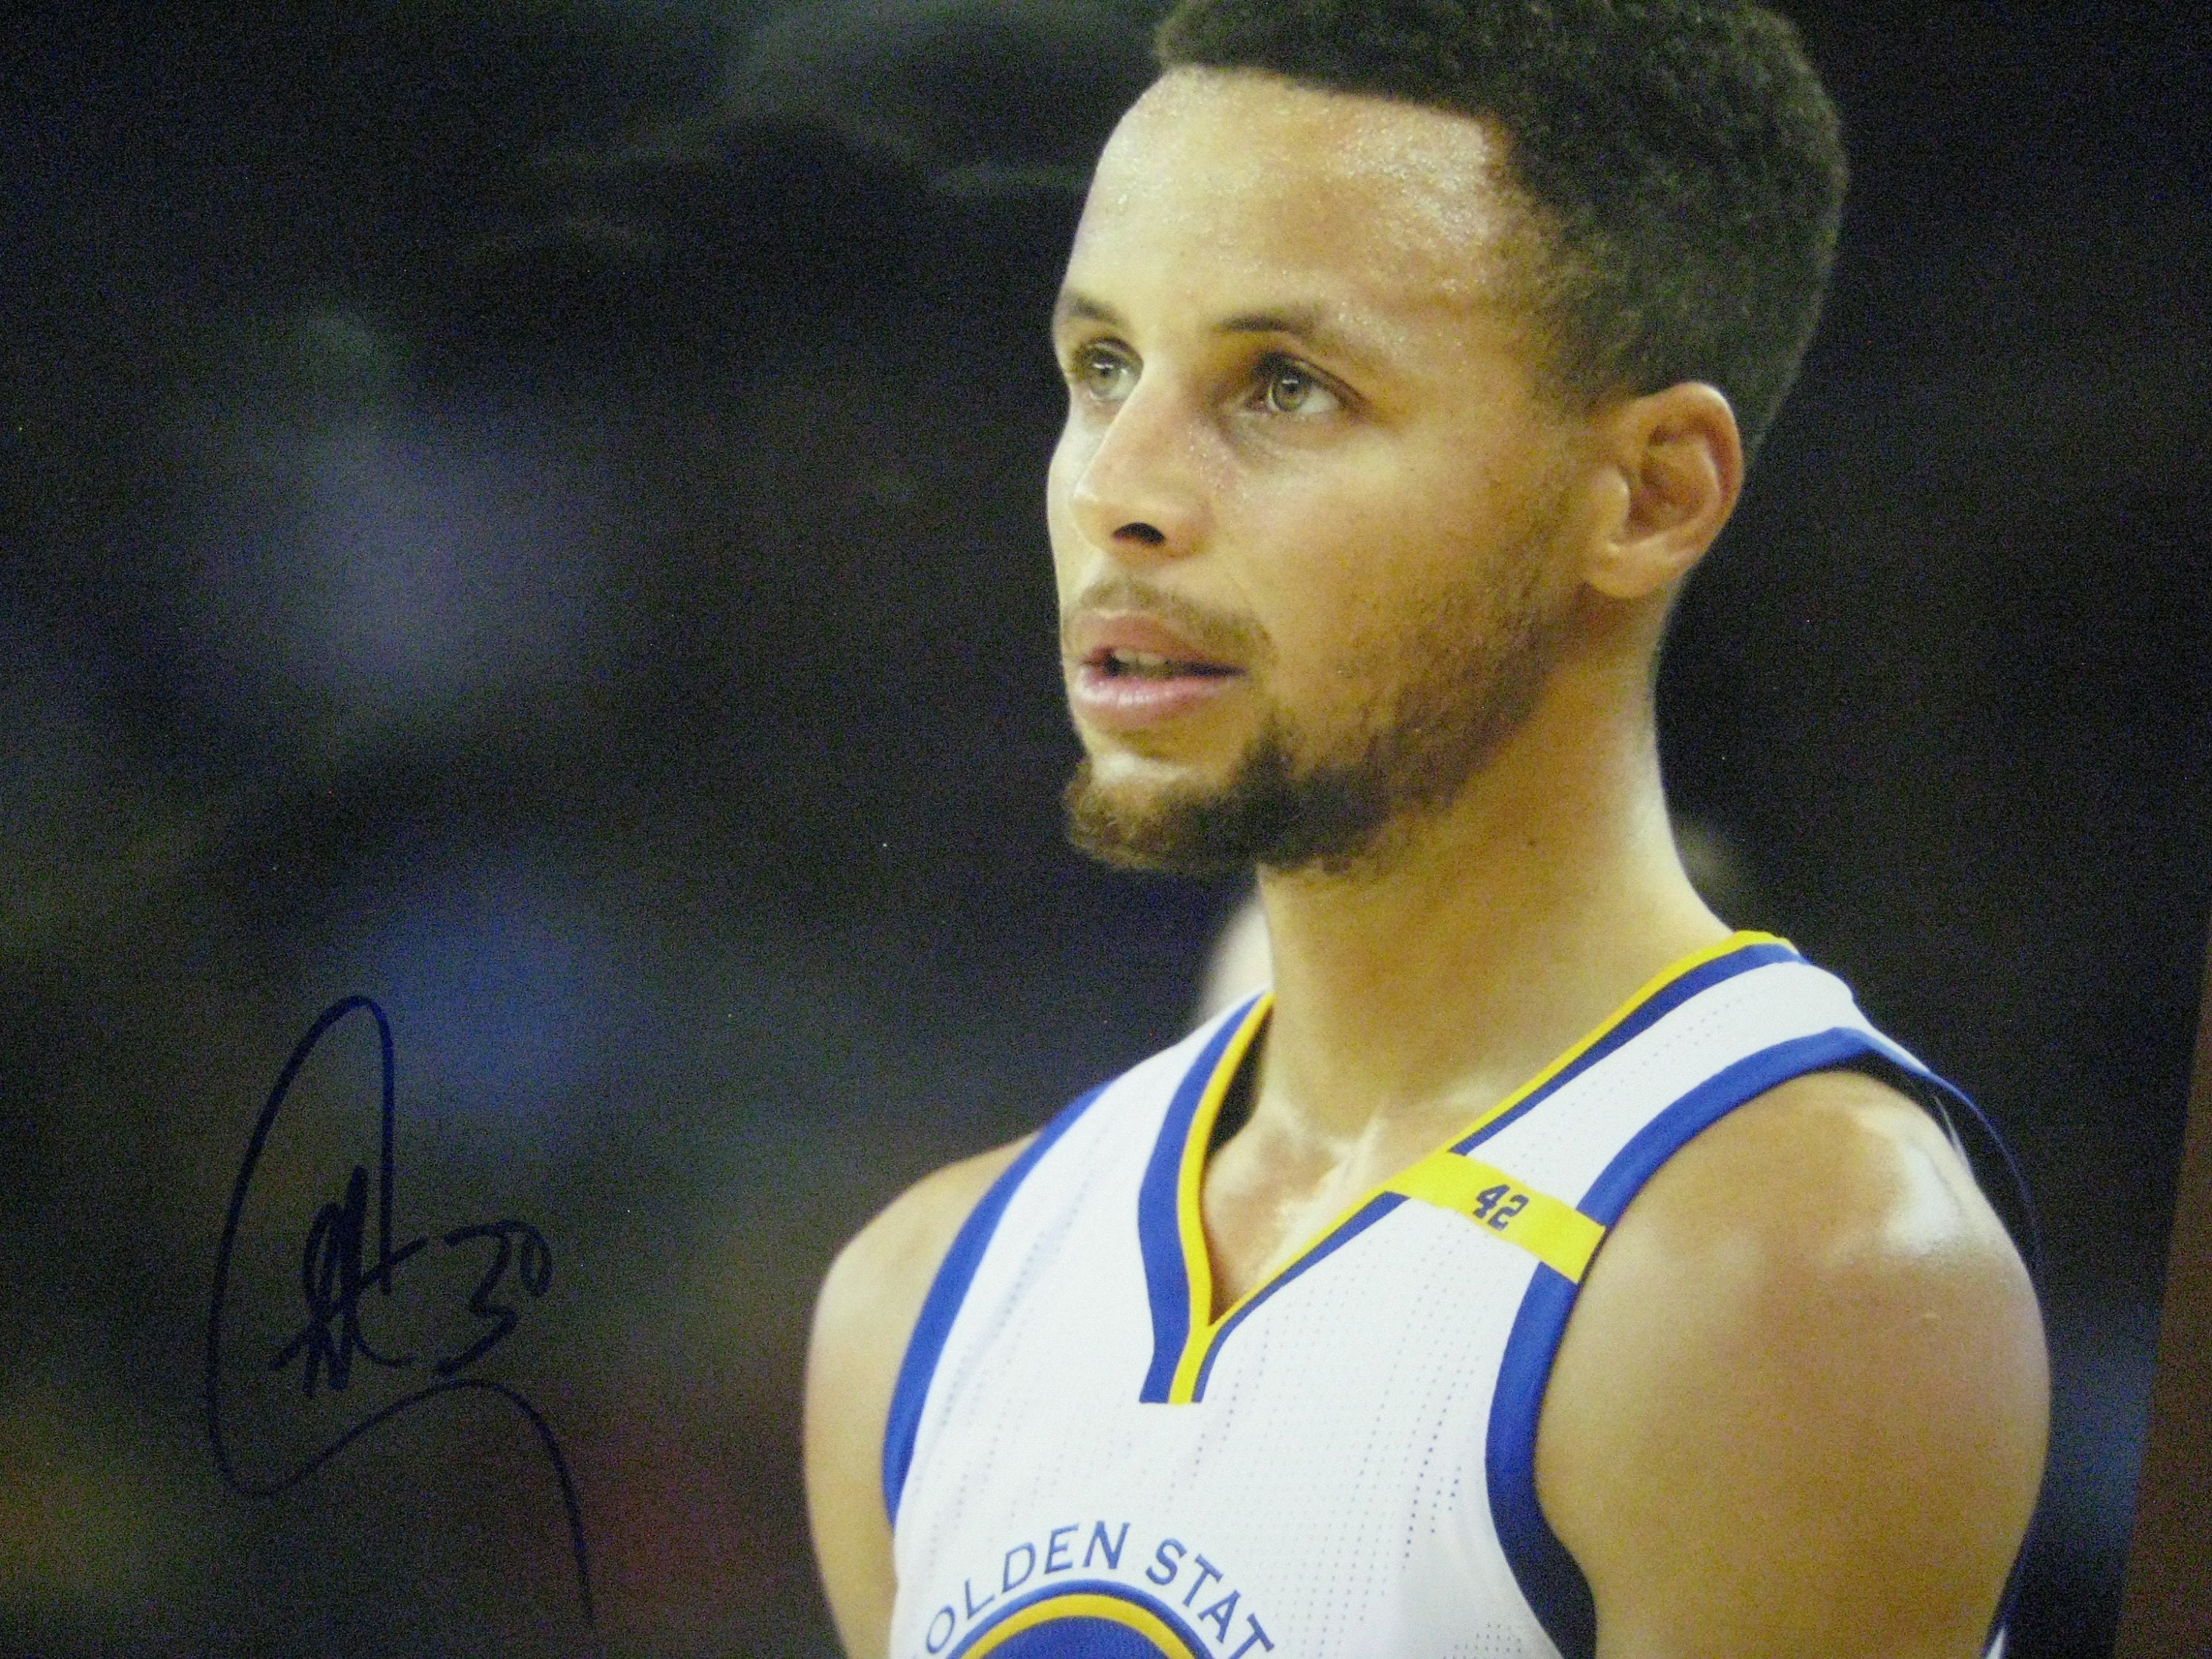 Stephen Curry Golden State Warriors Framed 15 x 17 Stars of the Game  Collage - Facsimile Signature - NBA Player Plaques and Collages